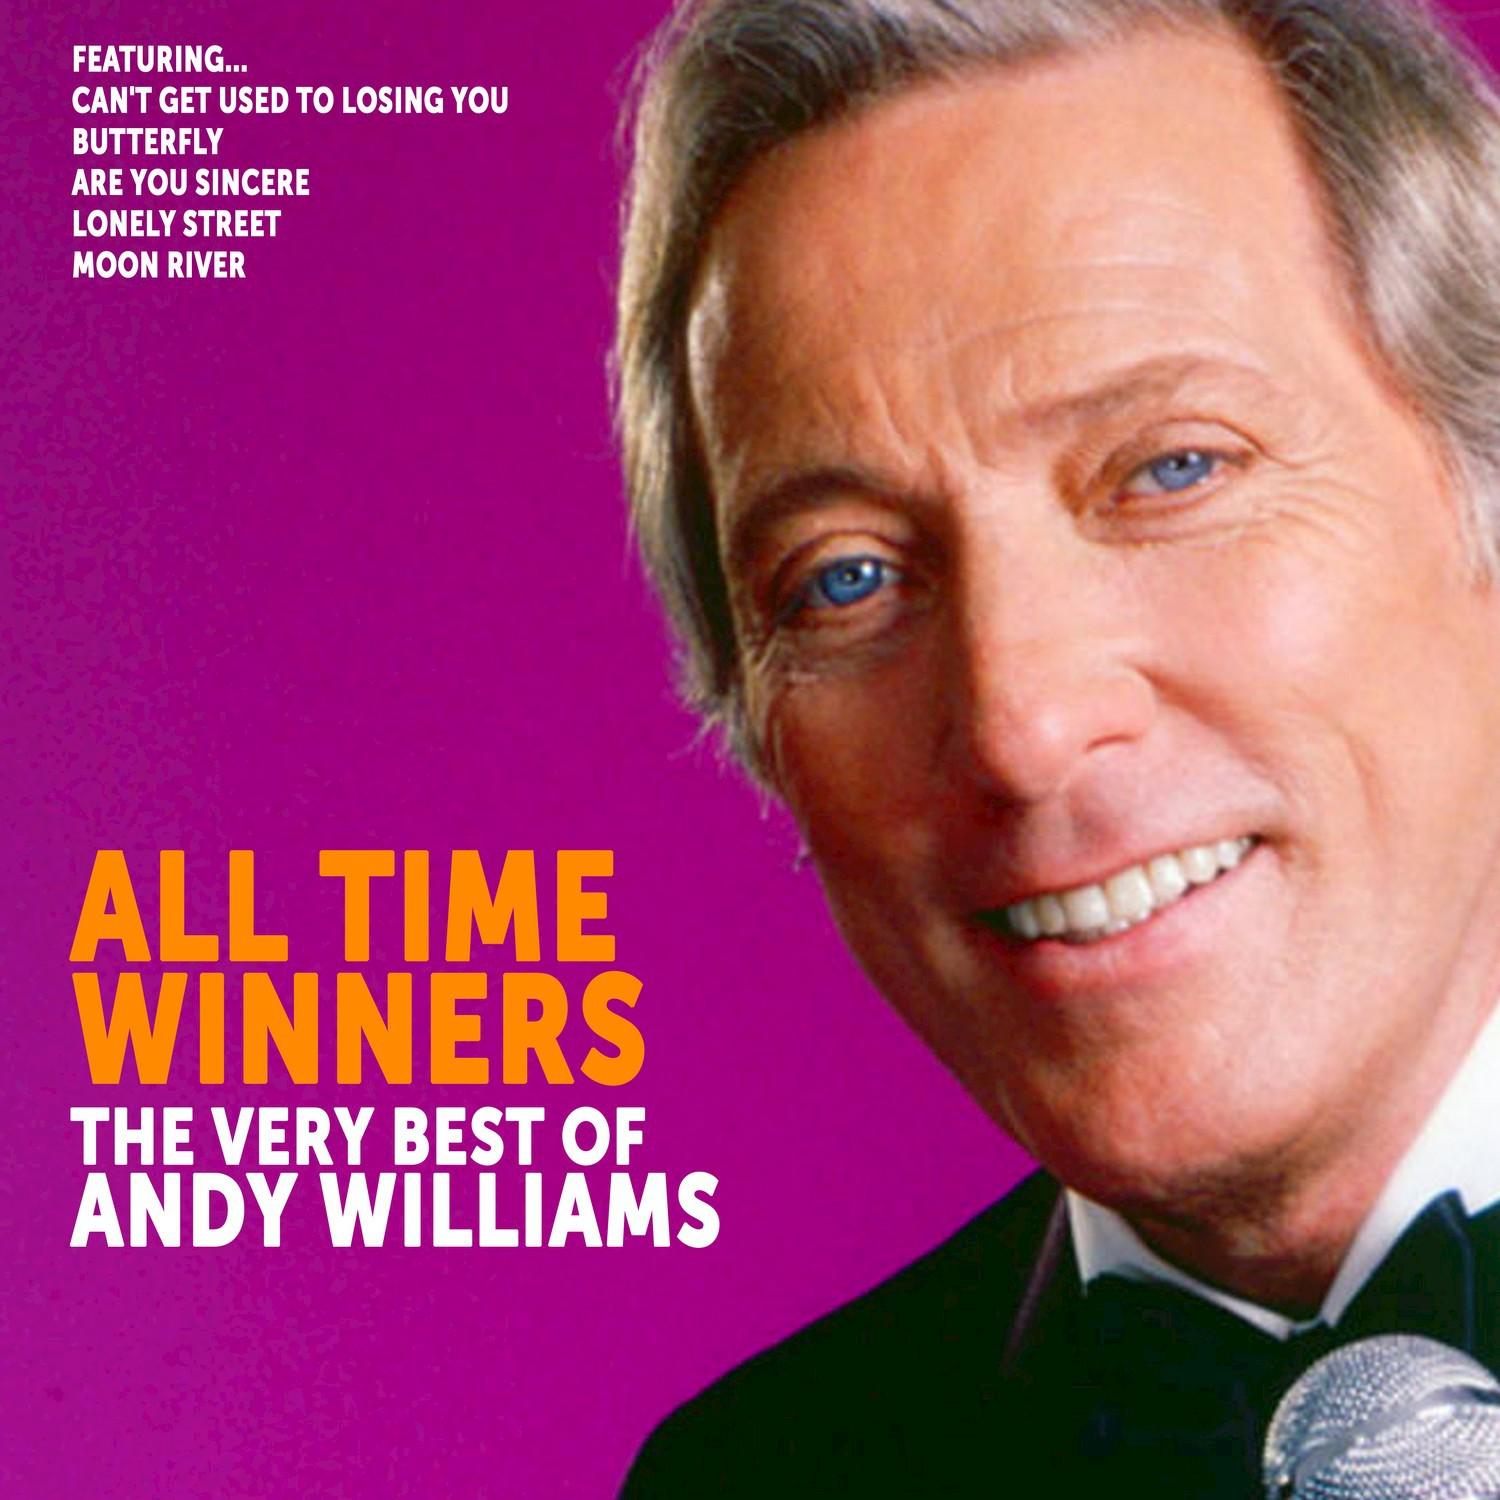 All Time Winners: The Very Best of Andy Williams